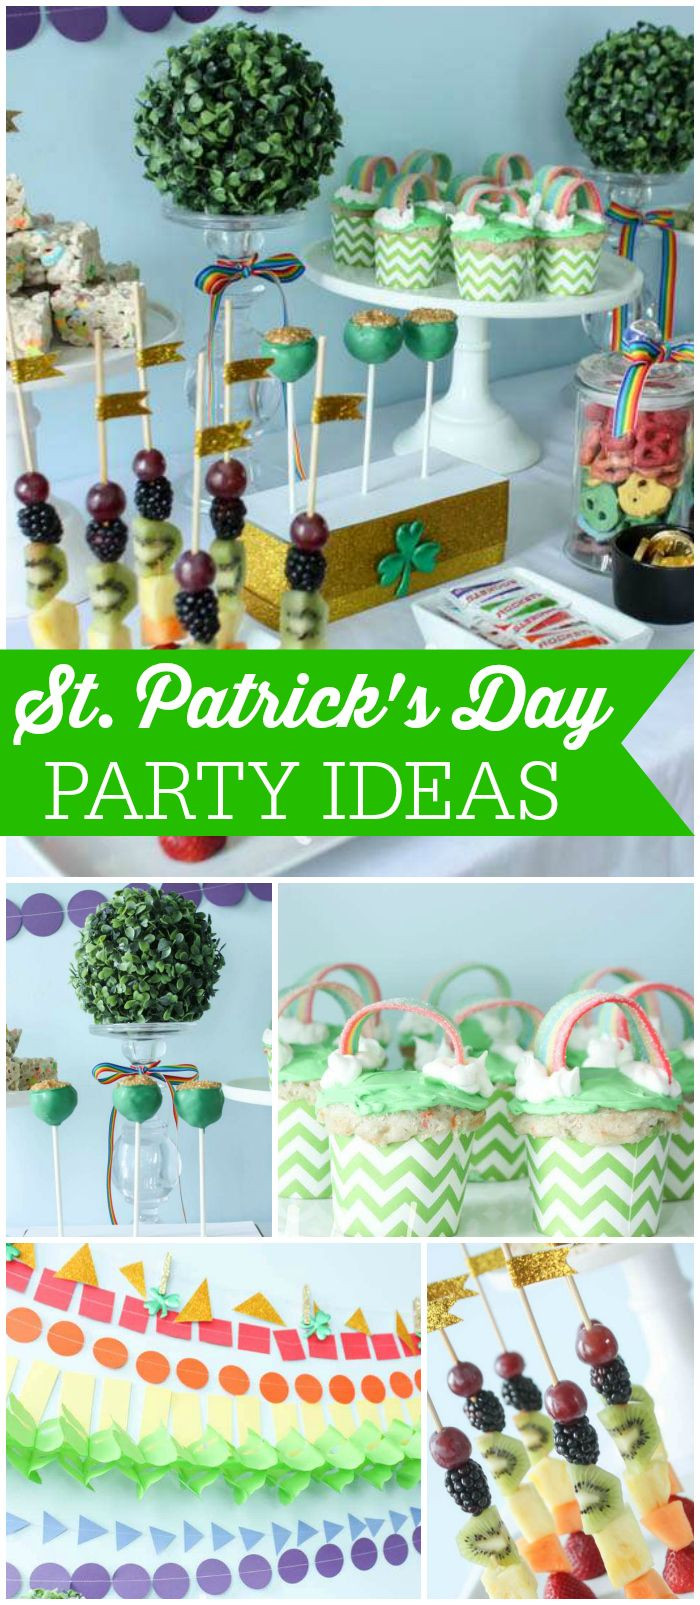 Ideas For St Patrick's Day
 251 best images about St Patrick s Day Party Ideas on